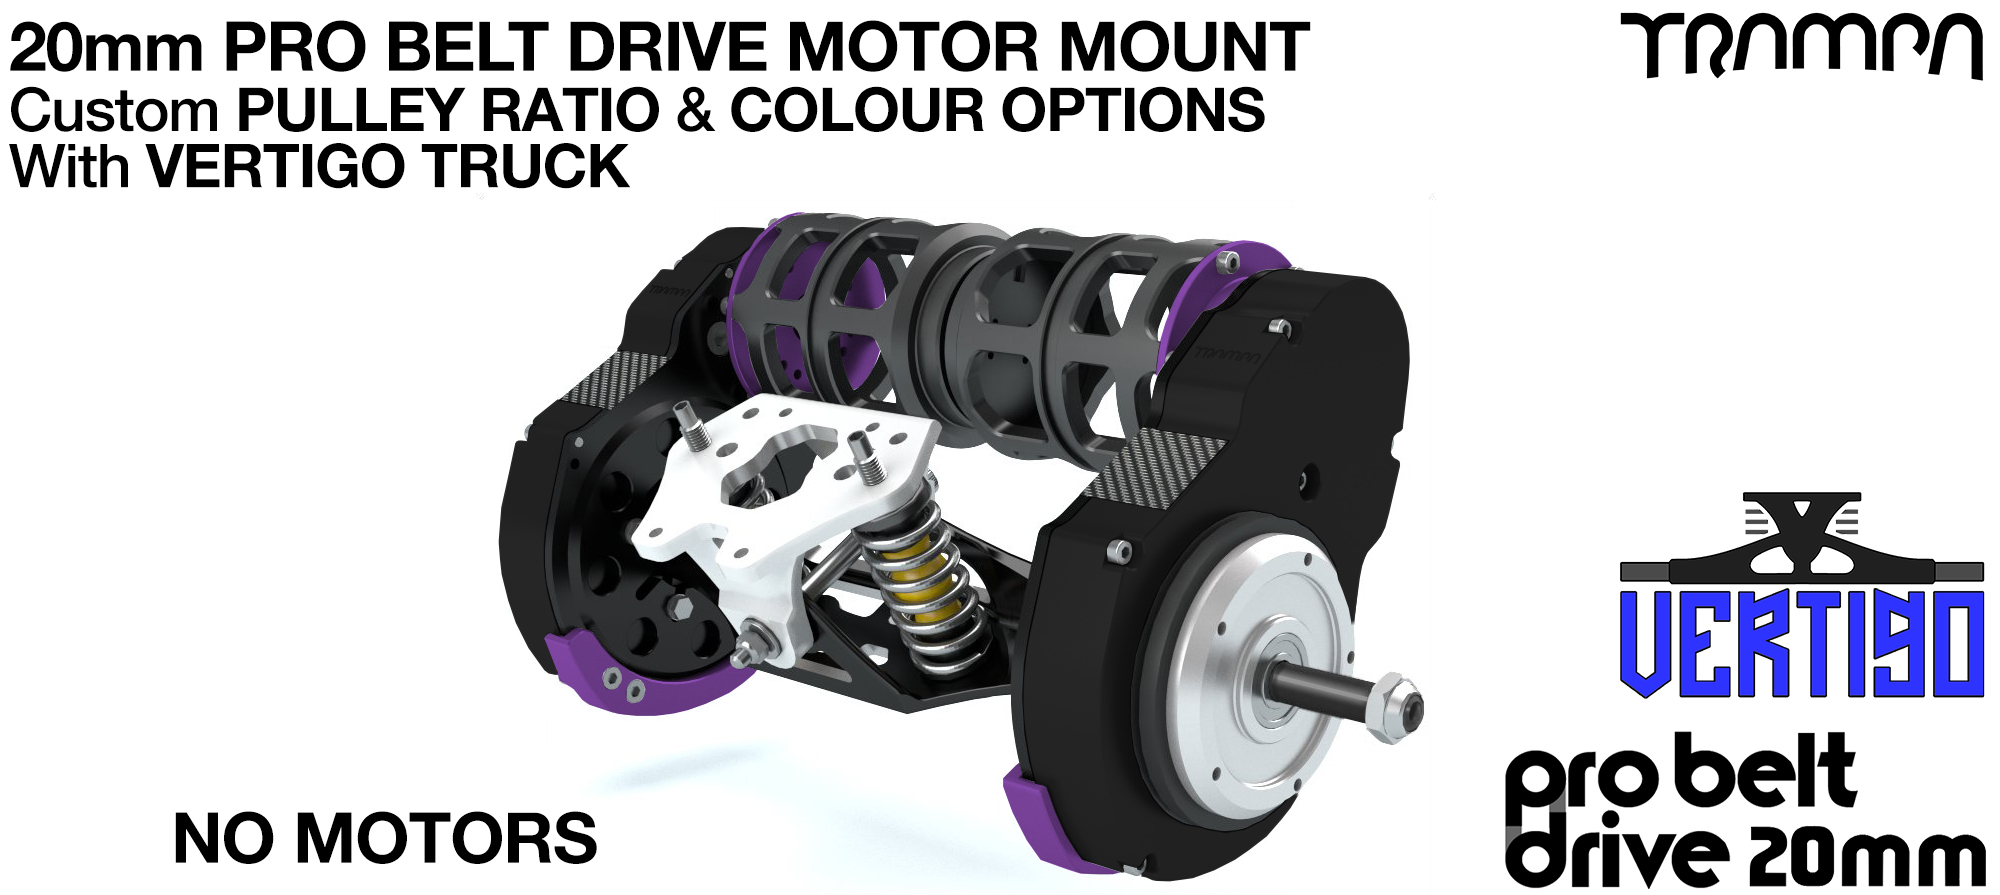 20mm PRO BELT DRIVE Motor Mounts with PULLEYS & FILTERS mounted on a Truck - NO Motors 